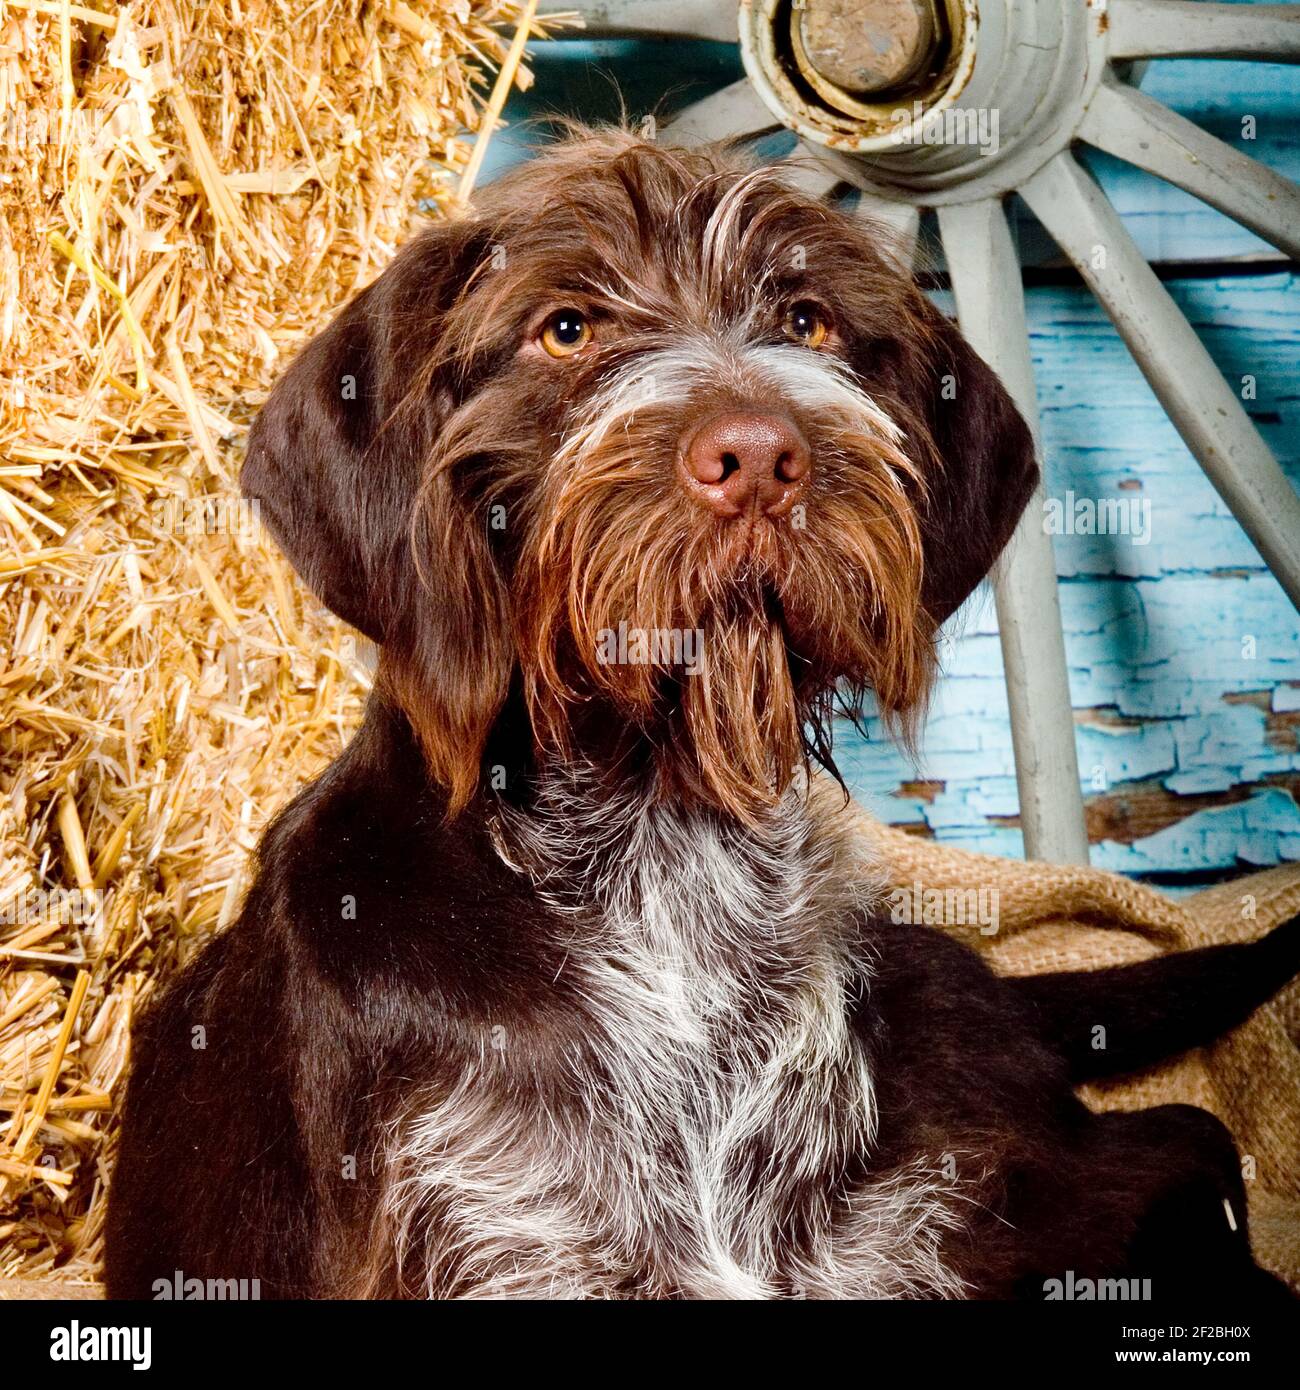 german wirehaired pointer, GWP Stock Photo